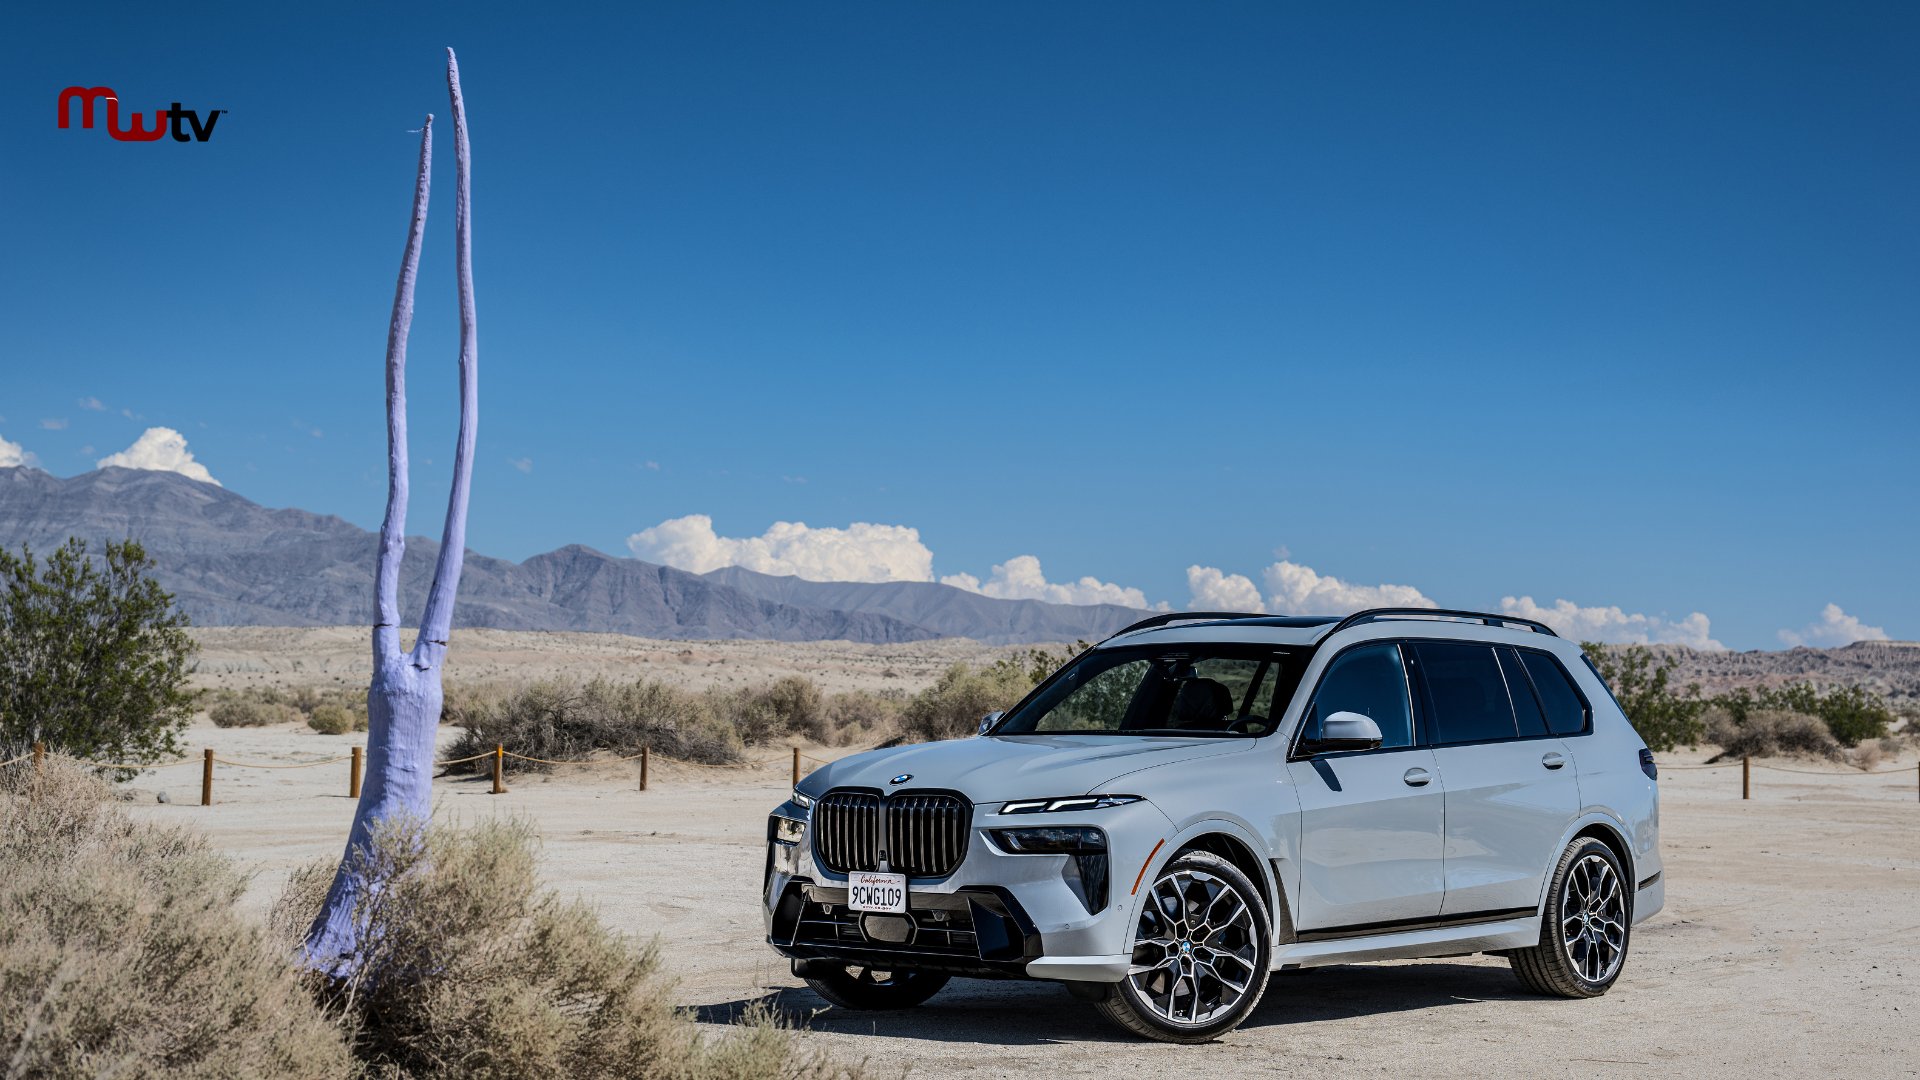 2023 BMW X7 facelift launched in India: Priced from Rs 1.22 crore - Car  News